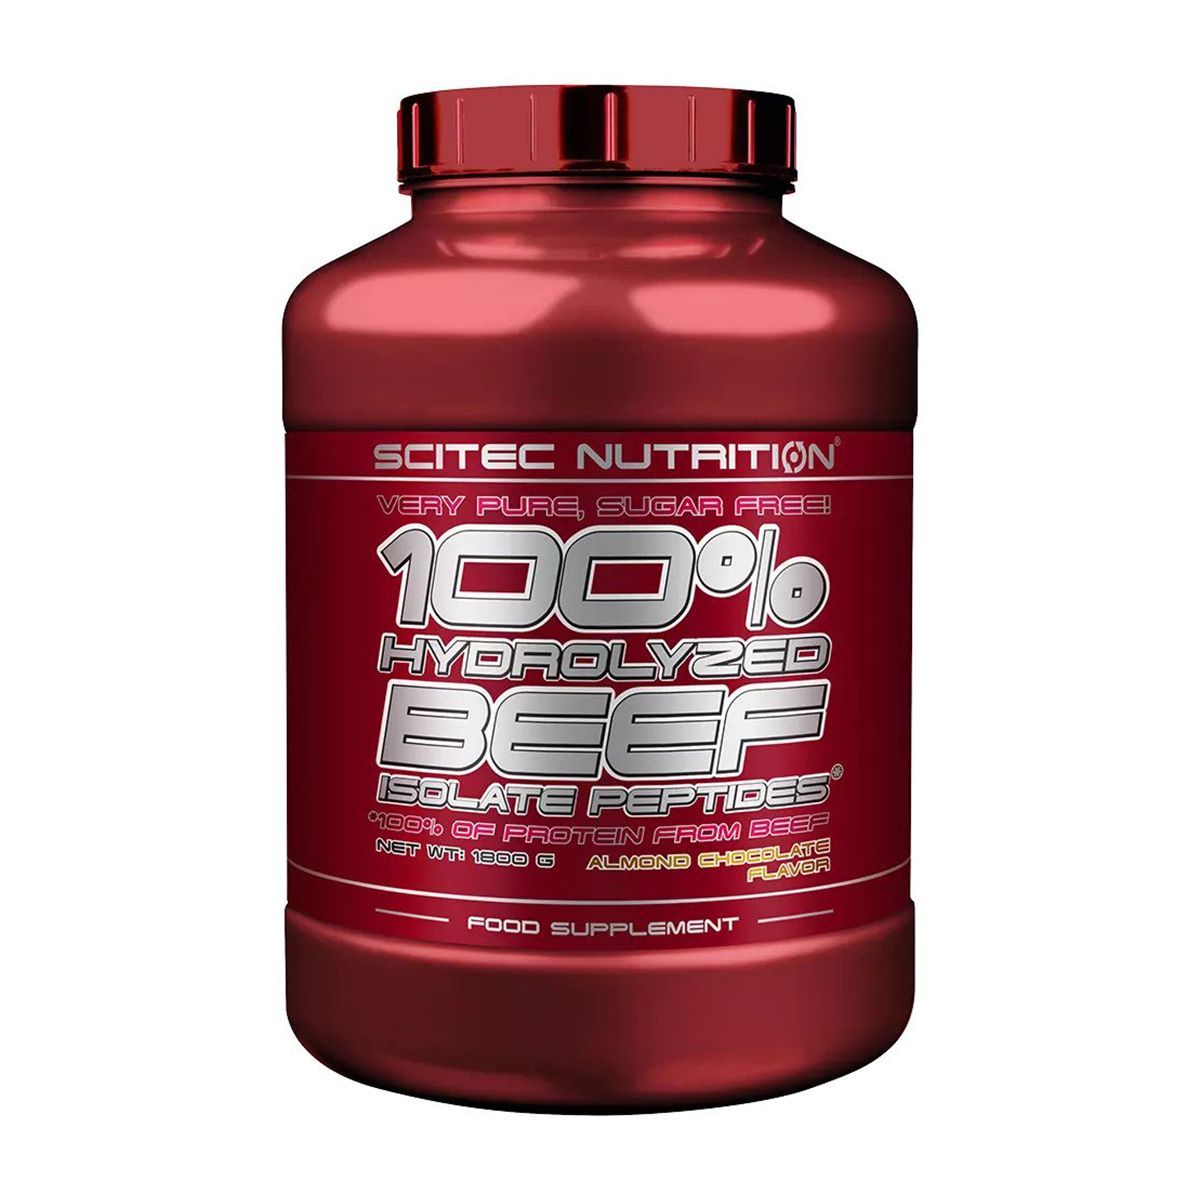 Scitec Nutrition - 100  Hydrolyzed Beef Isolate Peptides - 1800 g